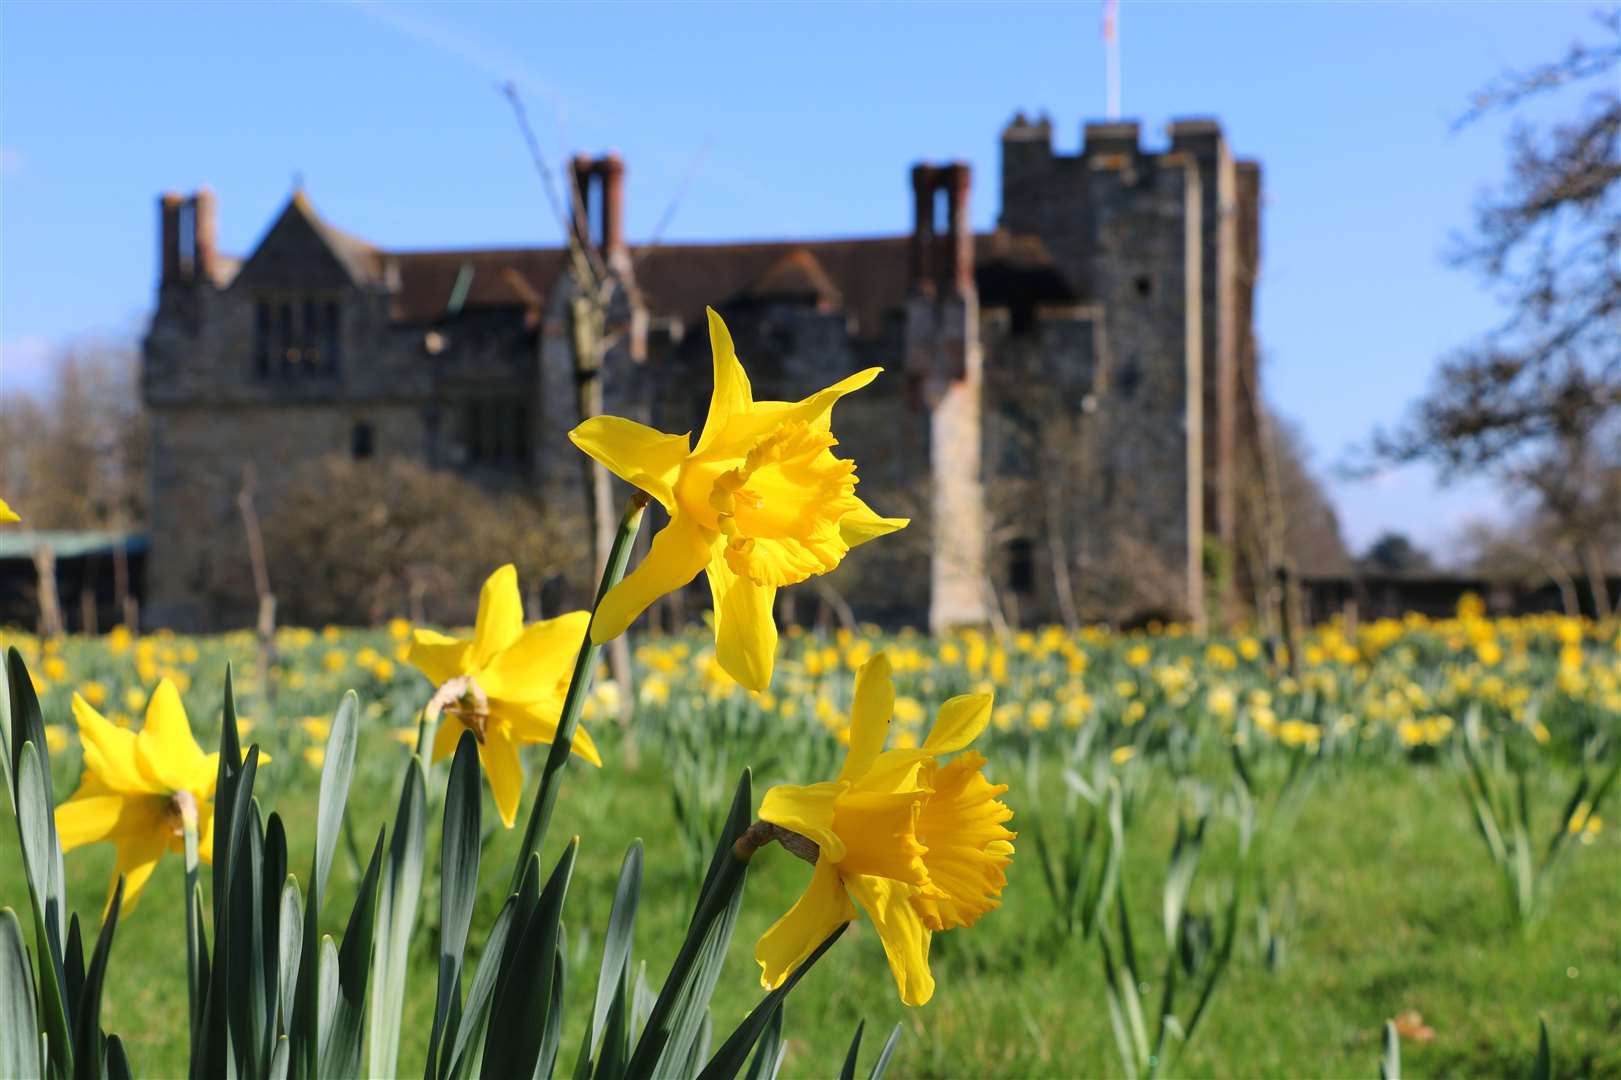 Hever Castle's gardens will be blooming